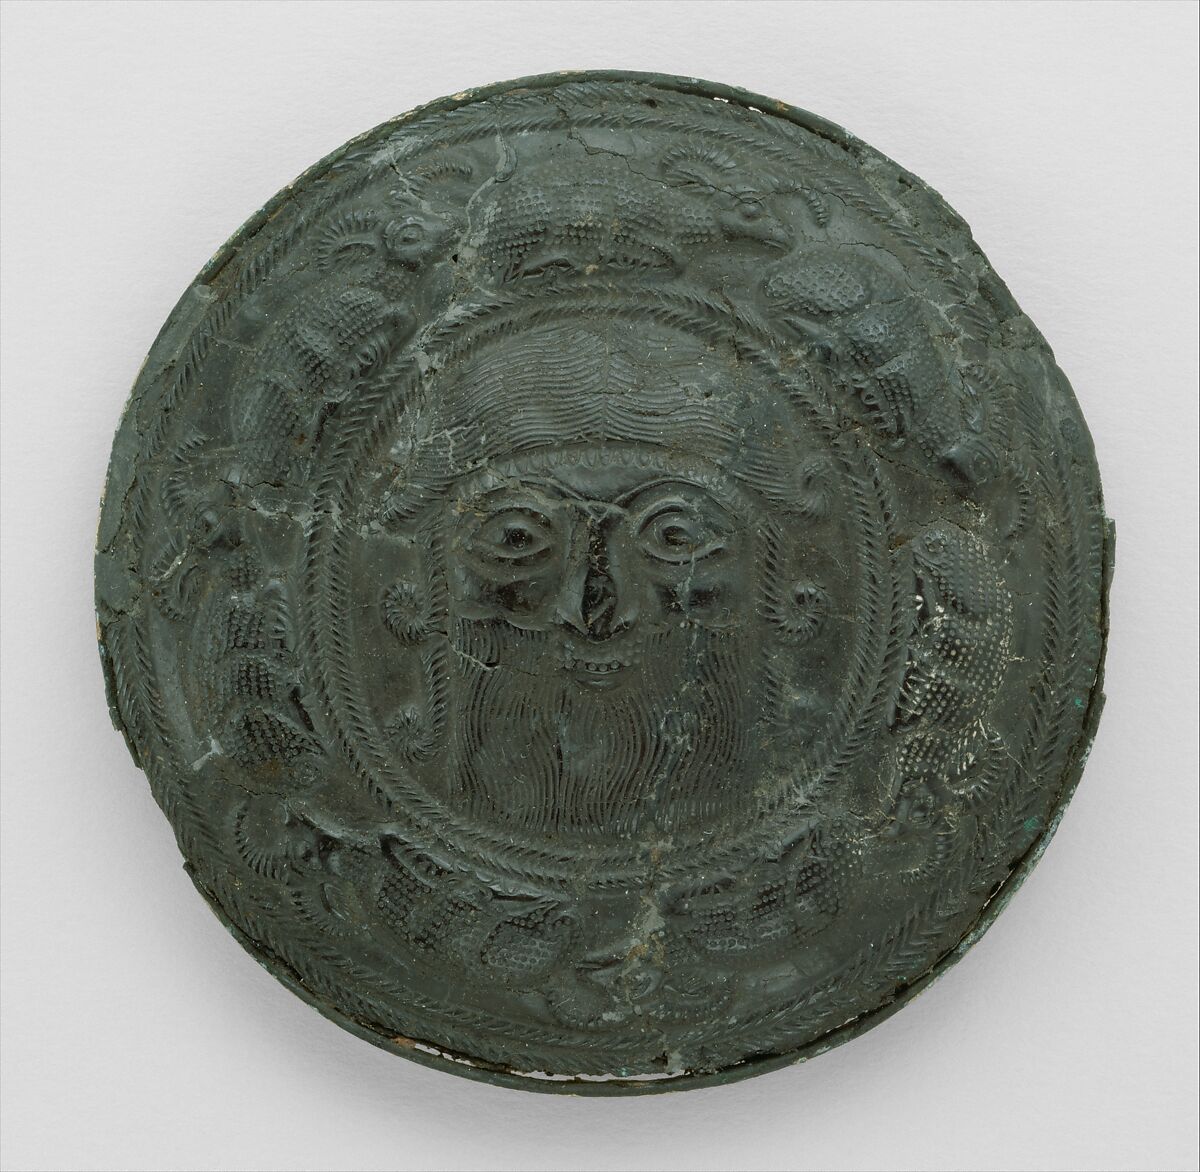 Roundel with head of a "hero" surrounded by caprids, Bitumen, gold and silver foil, Elamite 